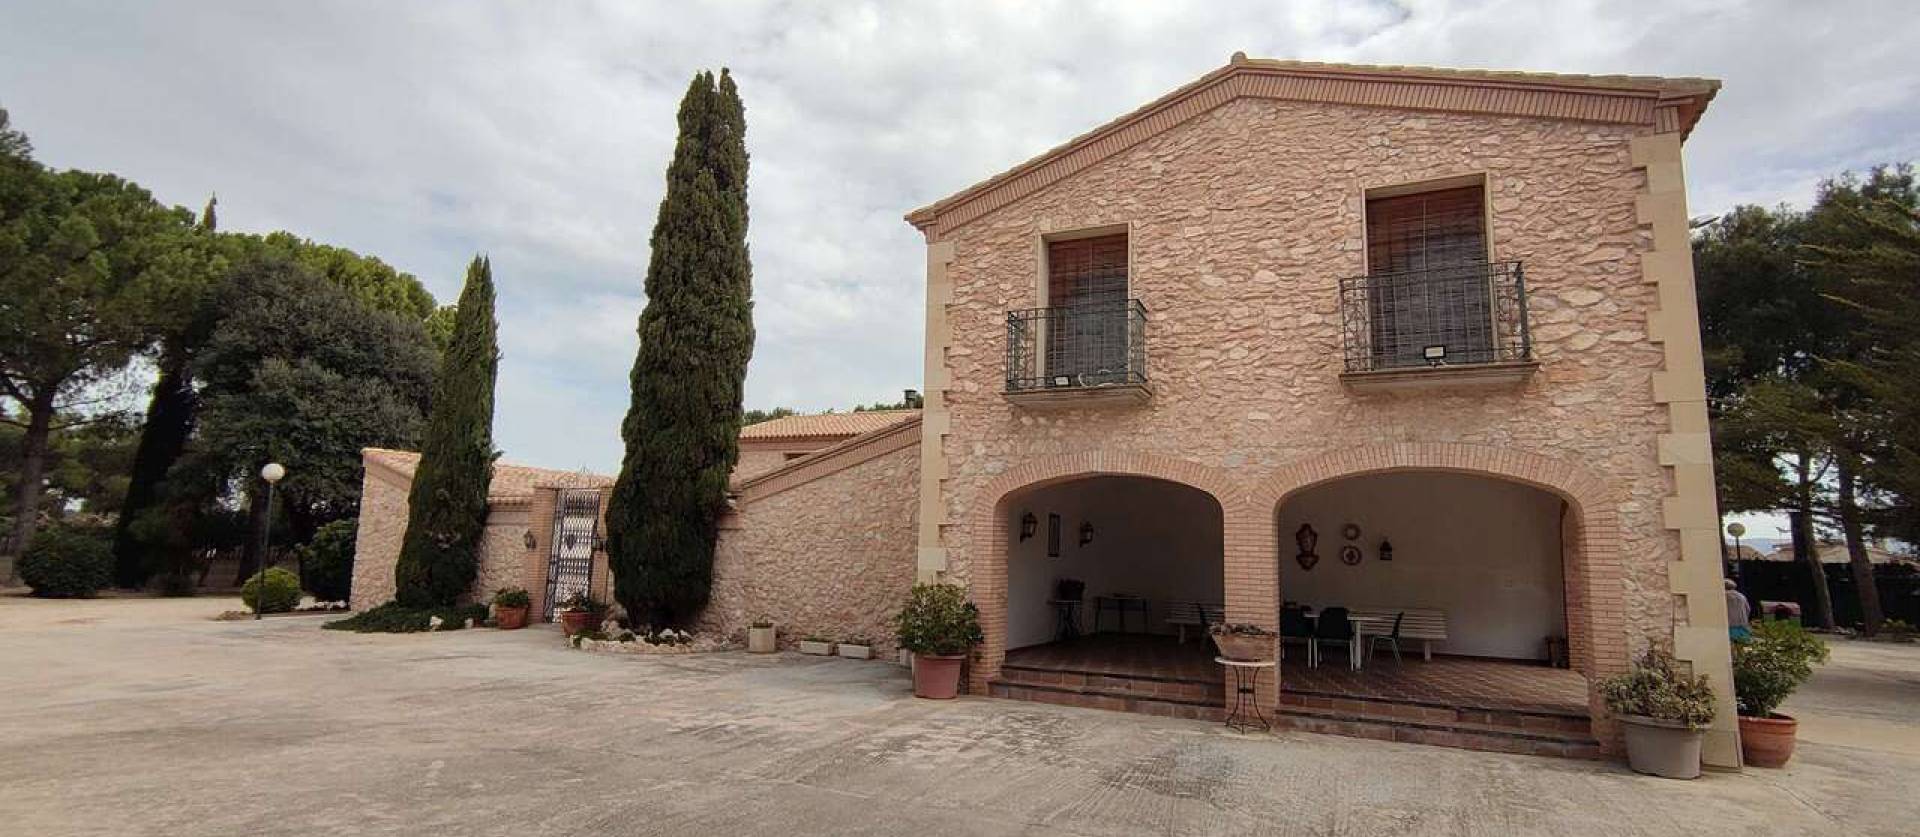 Sale - Country House - Villena